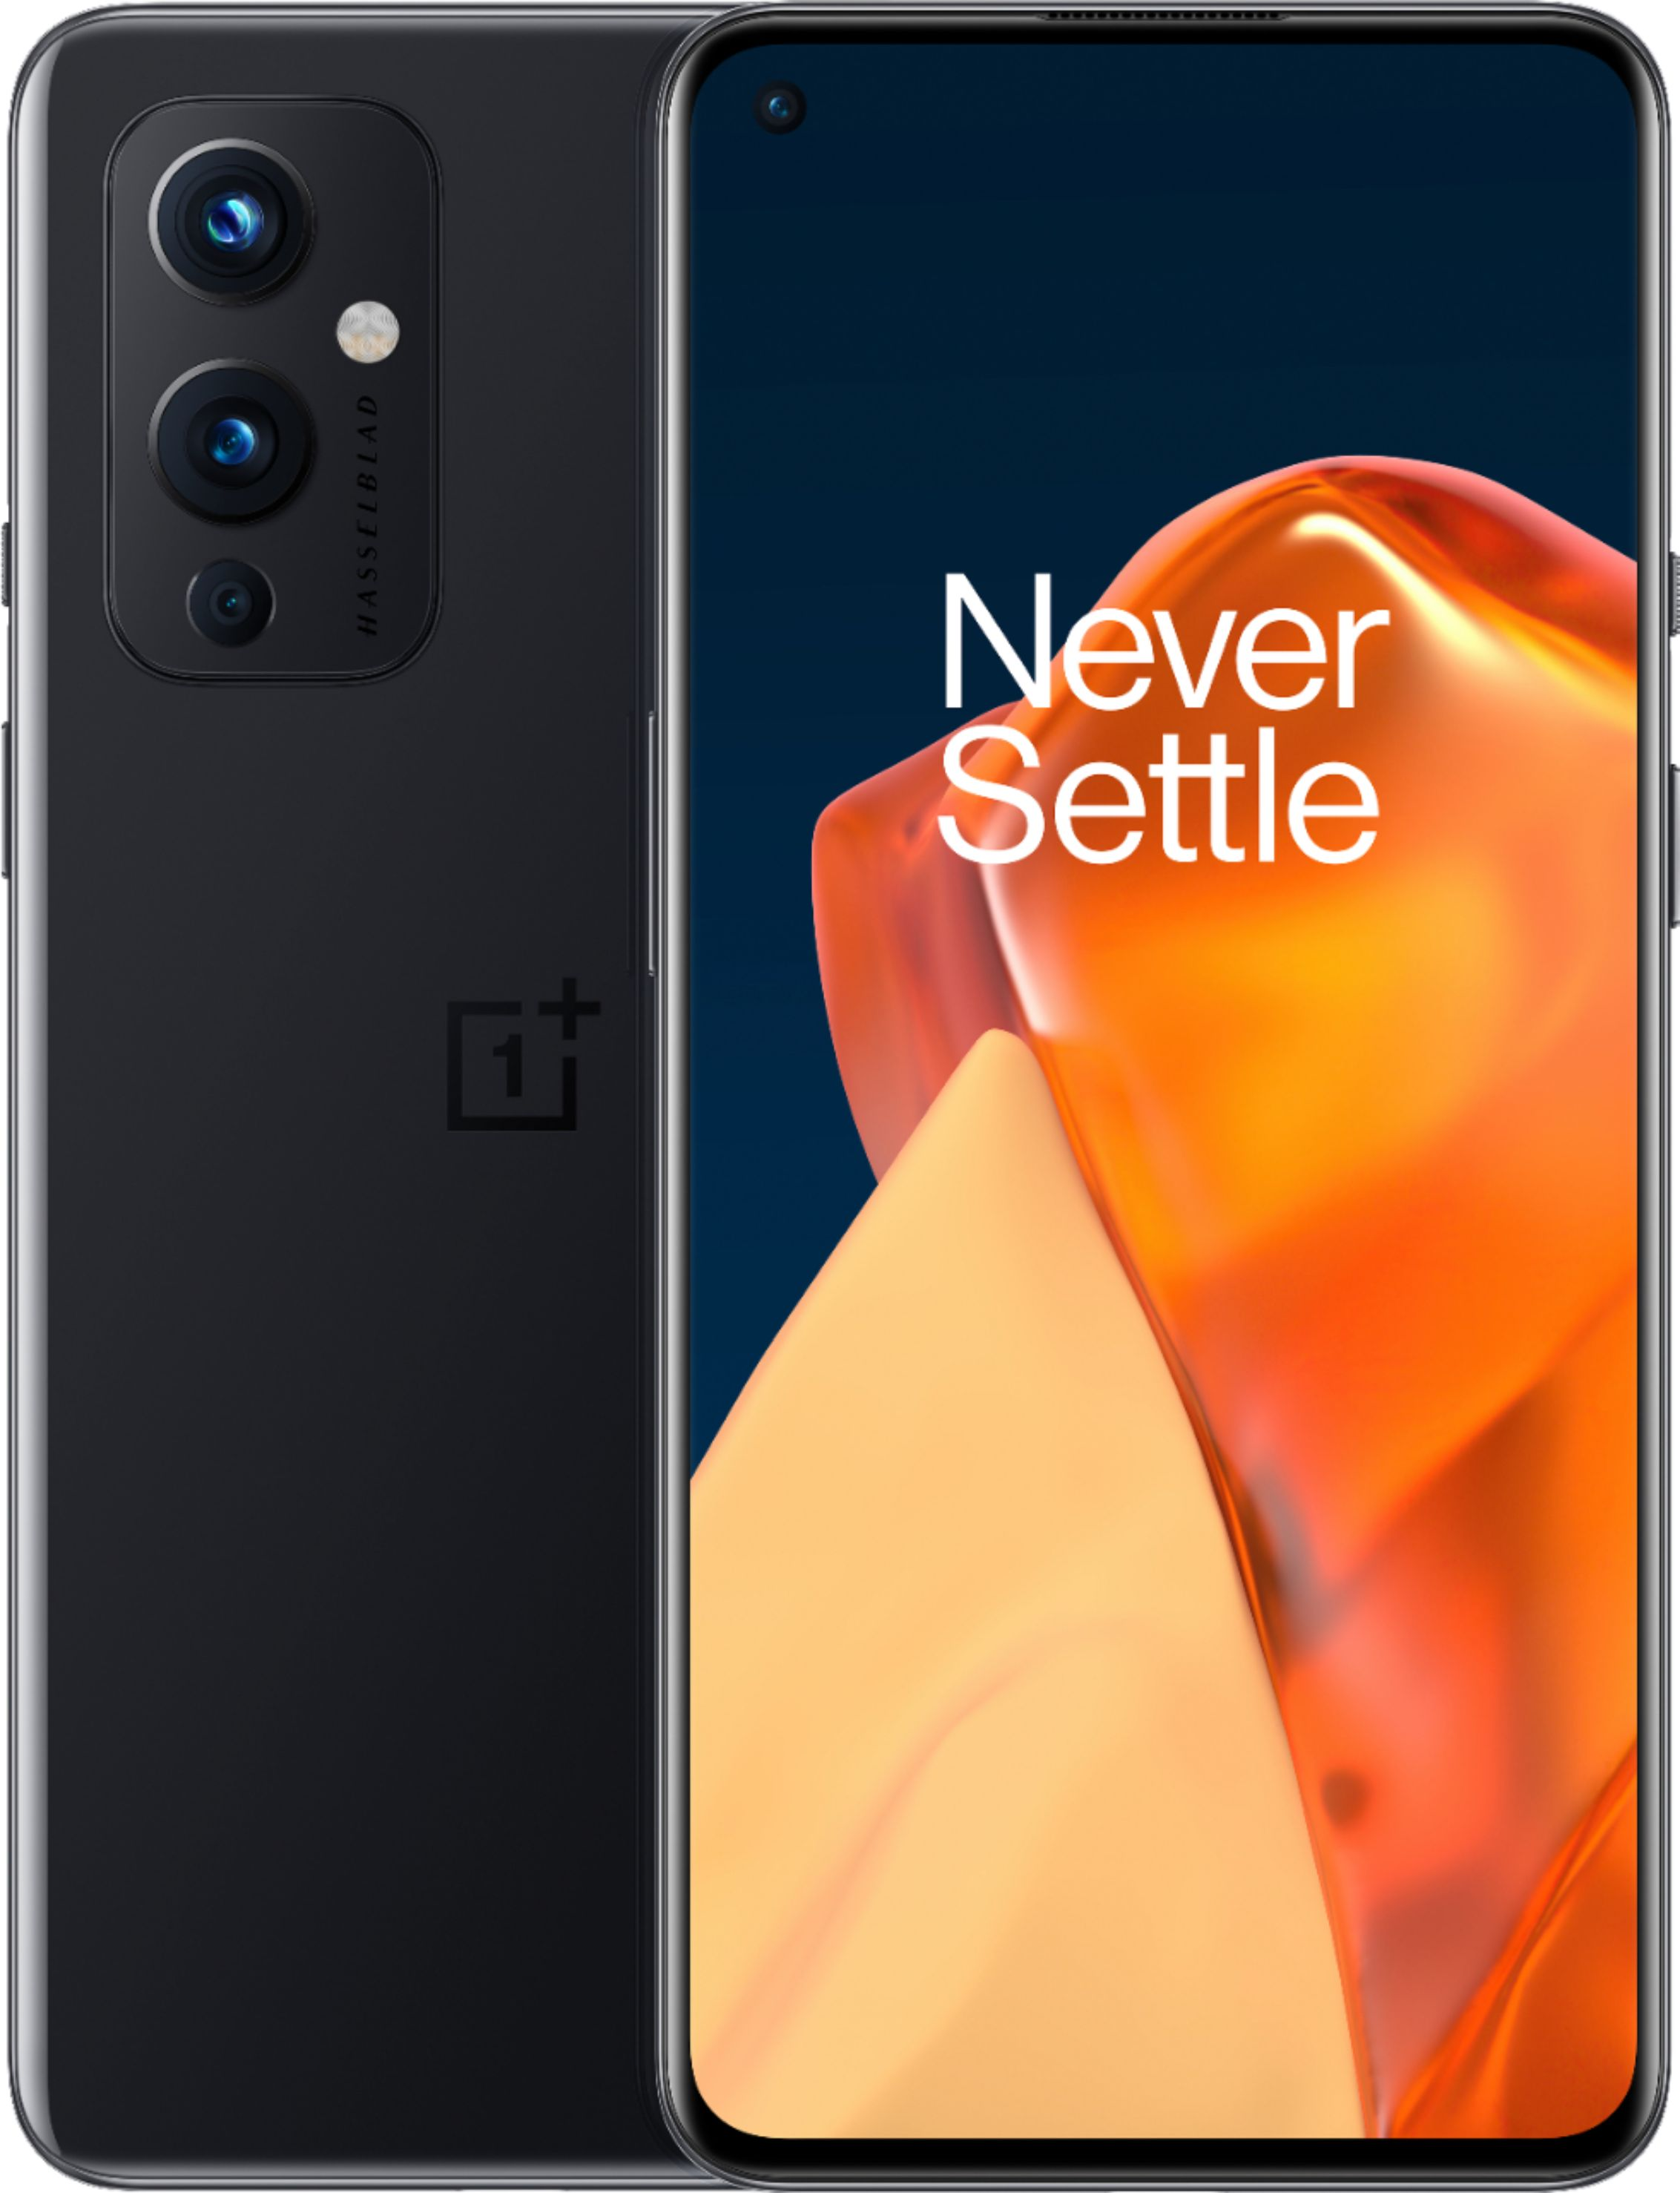 OnePlus 9 5g - 128gb Unlocked - $649.99 at multiple stores $649.99